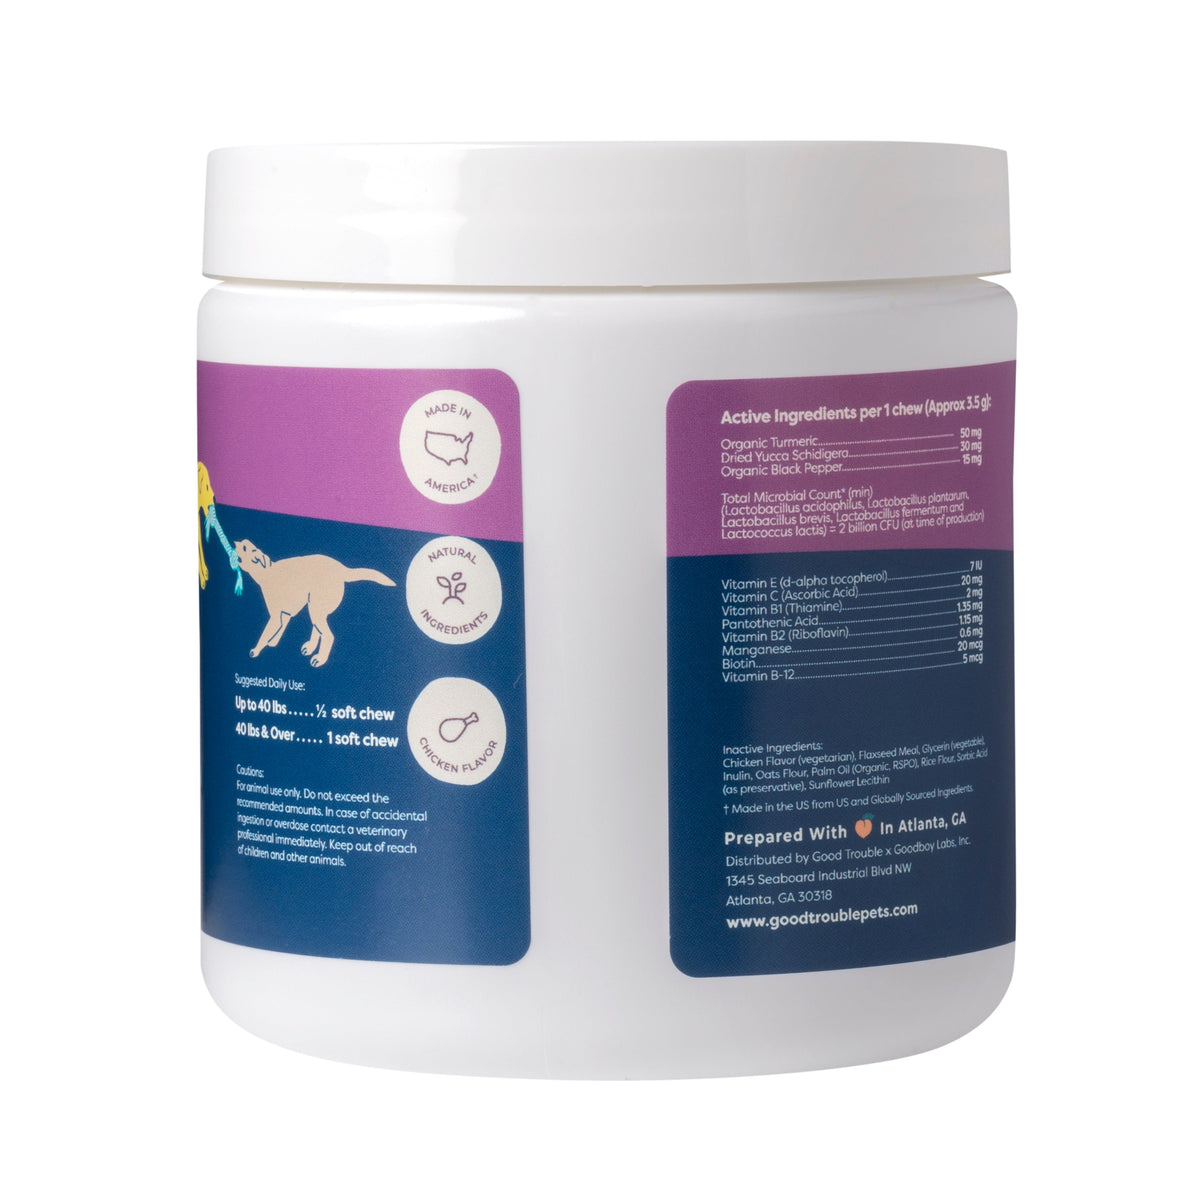 Dog Probiotic Supplement FREE Trial